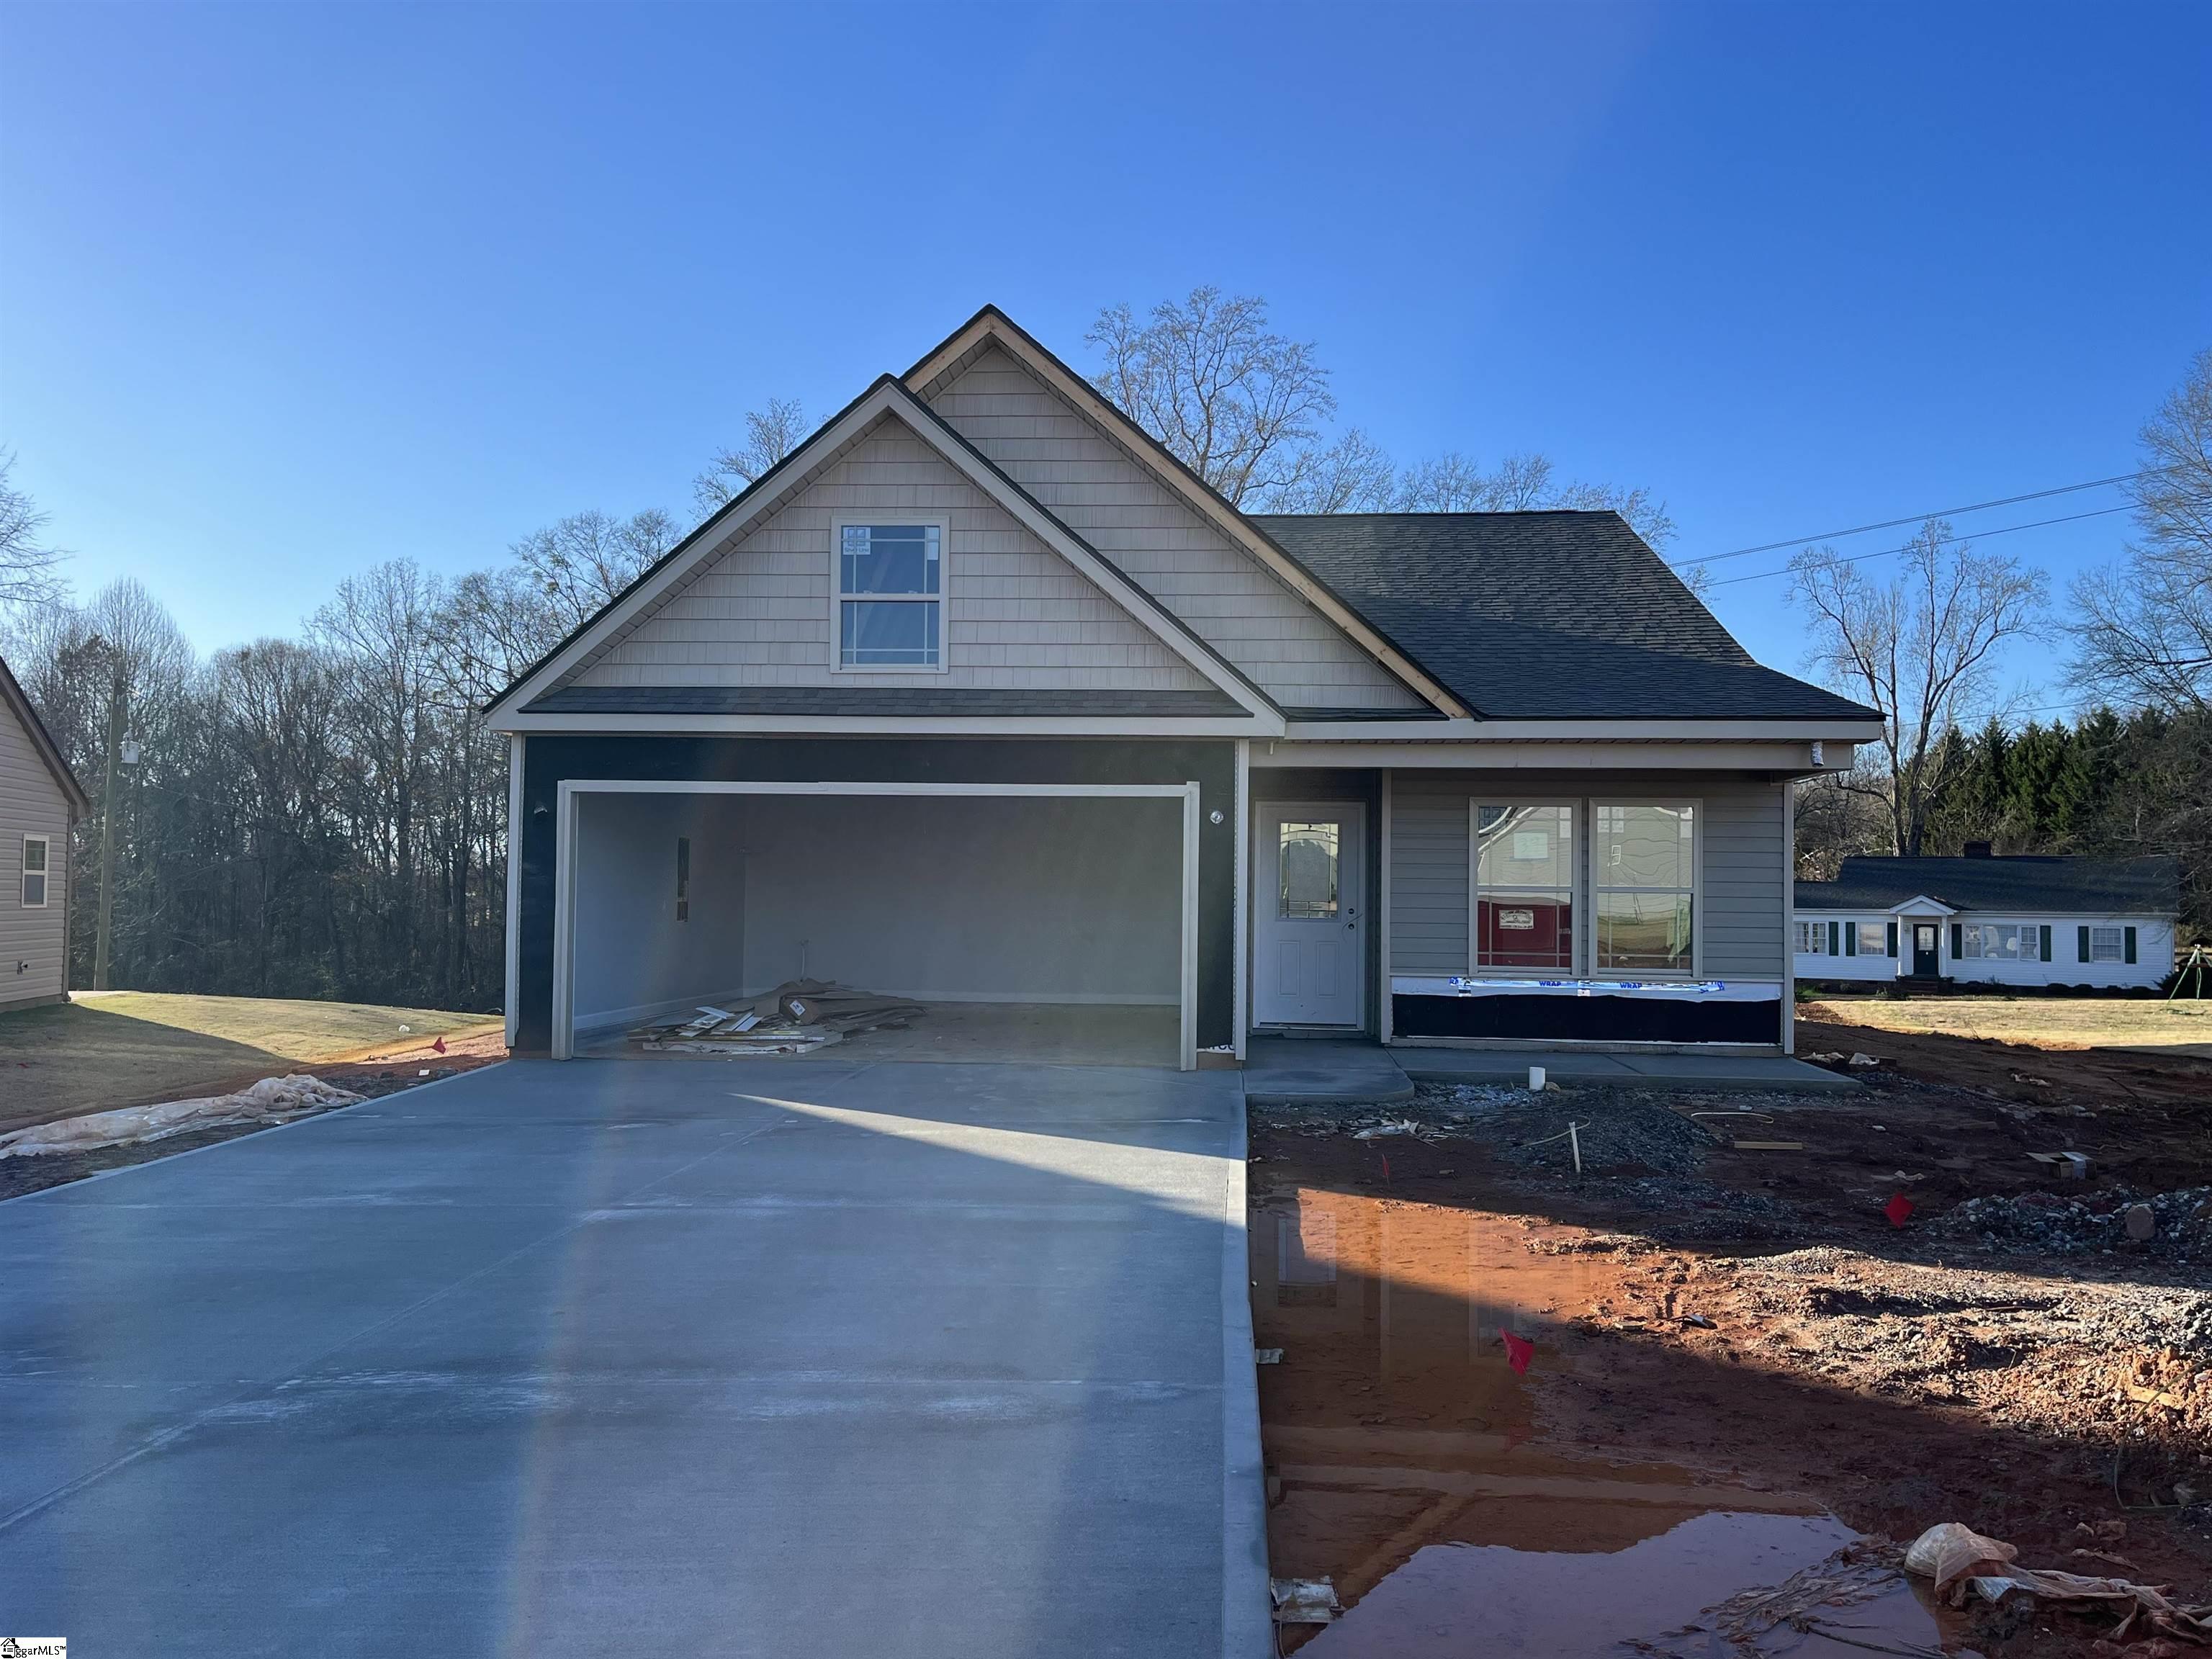 The Bishop plan is a single story plan featuring 3 bedrooms and 2 bathrooms plus an office/study. Standard features include trey ceiling with rope lighting in the living area and master bedroom, a fireplace, granite countertops throughout, and a back patio. Located in the NEW Elliott Park in Lyman just minutes from Spartanburg and Greenville. Call today for more info!